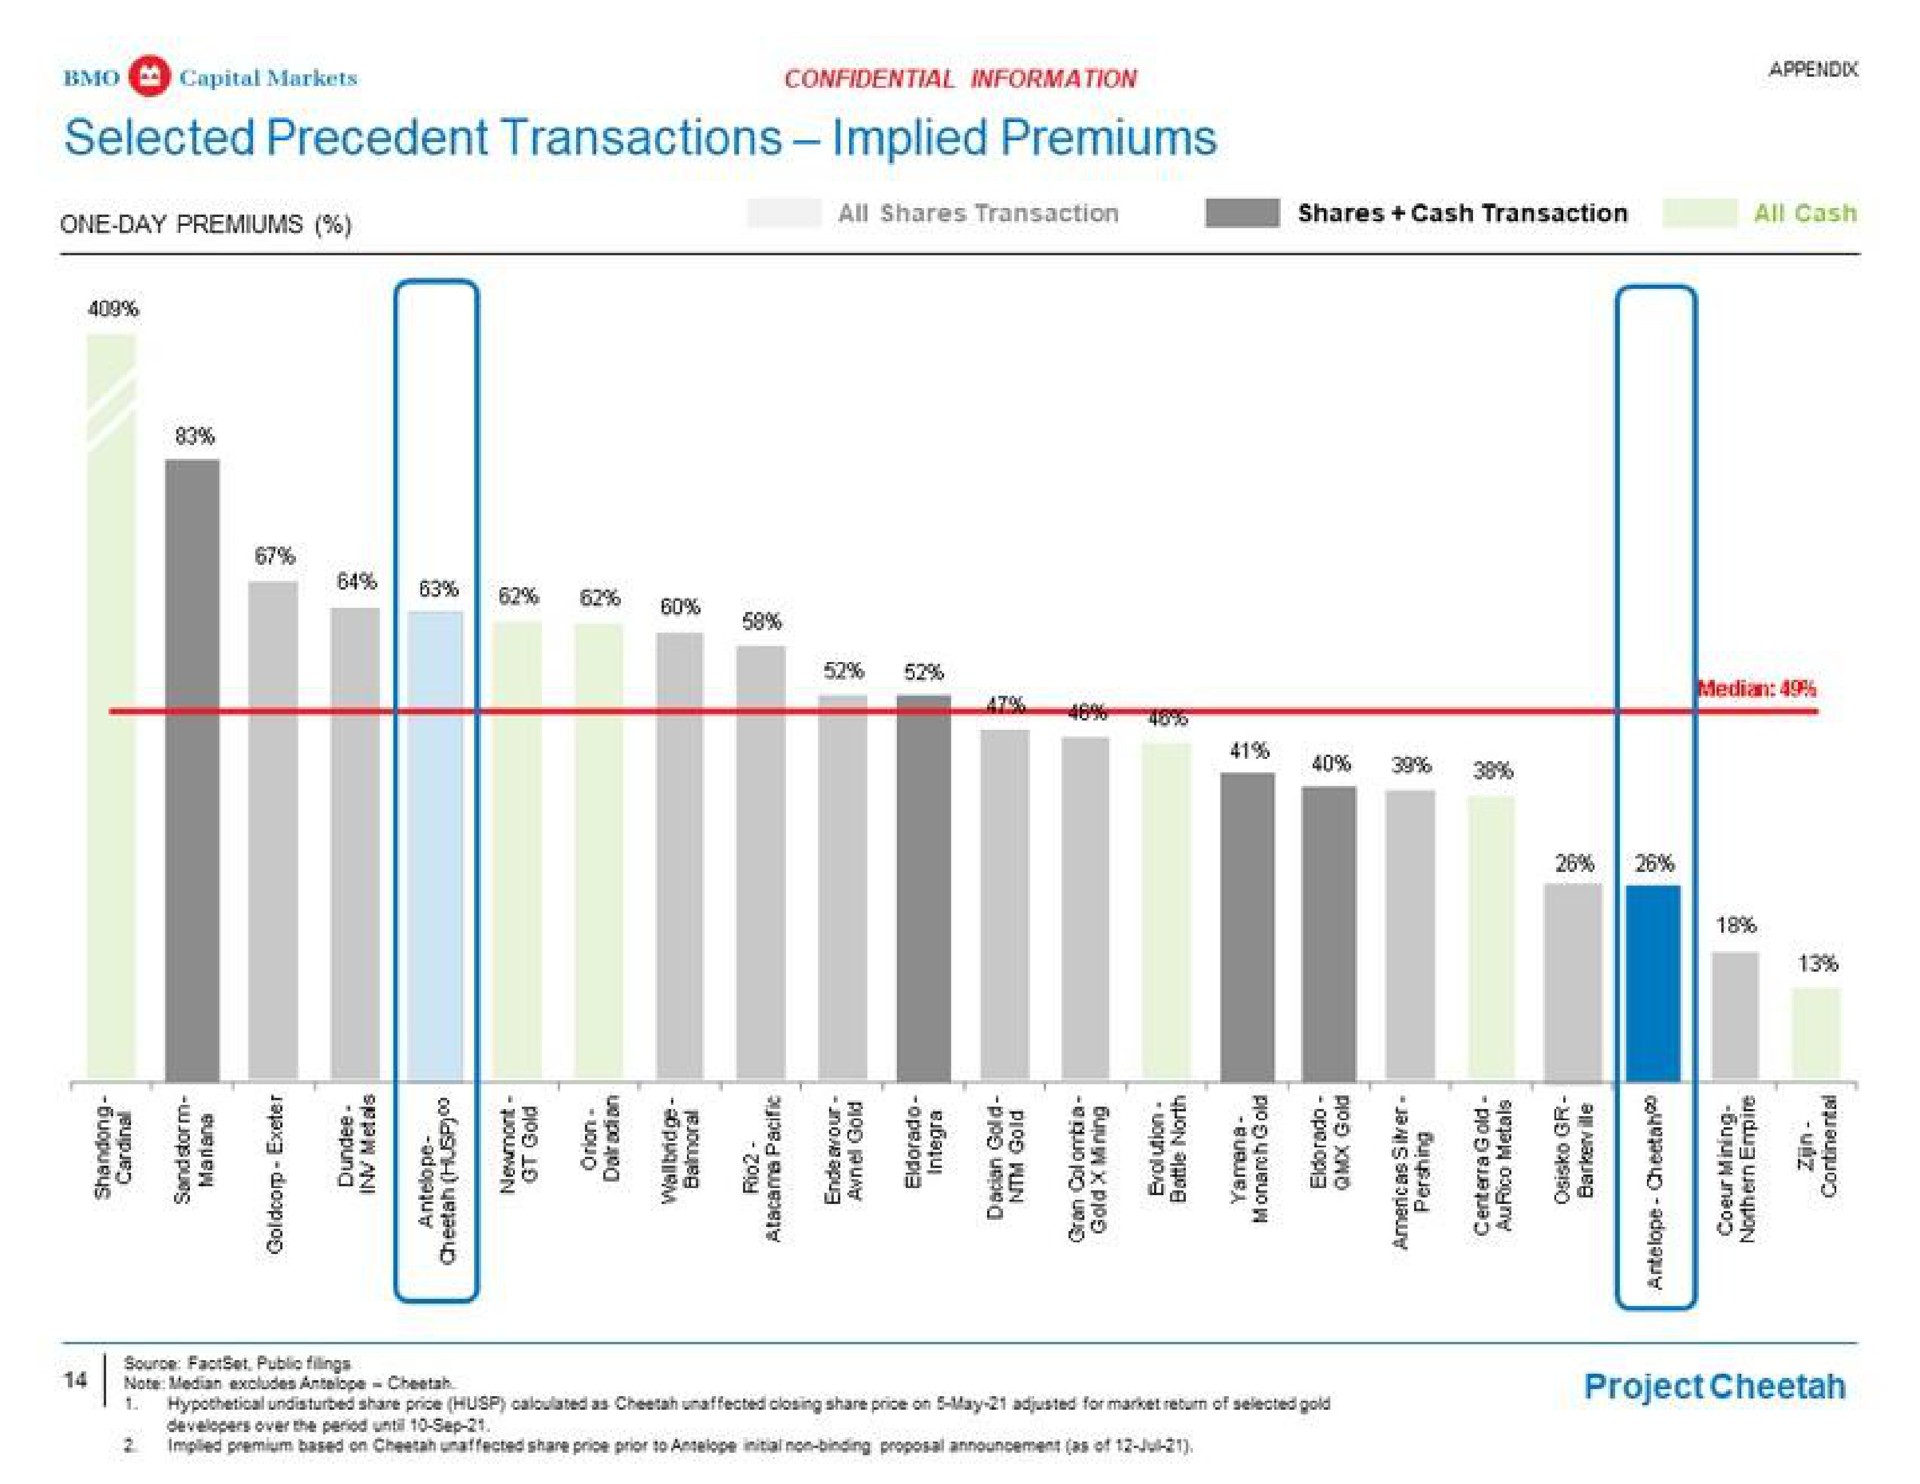 selected precedent transactions implied premiums a a a a rad a rel note median excludes antelope cheetah project cheetah | BMO Capital Markets